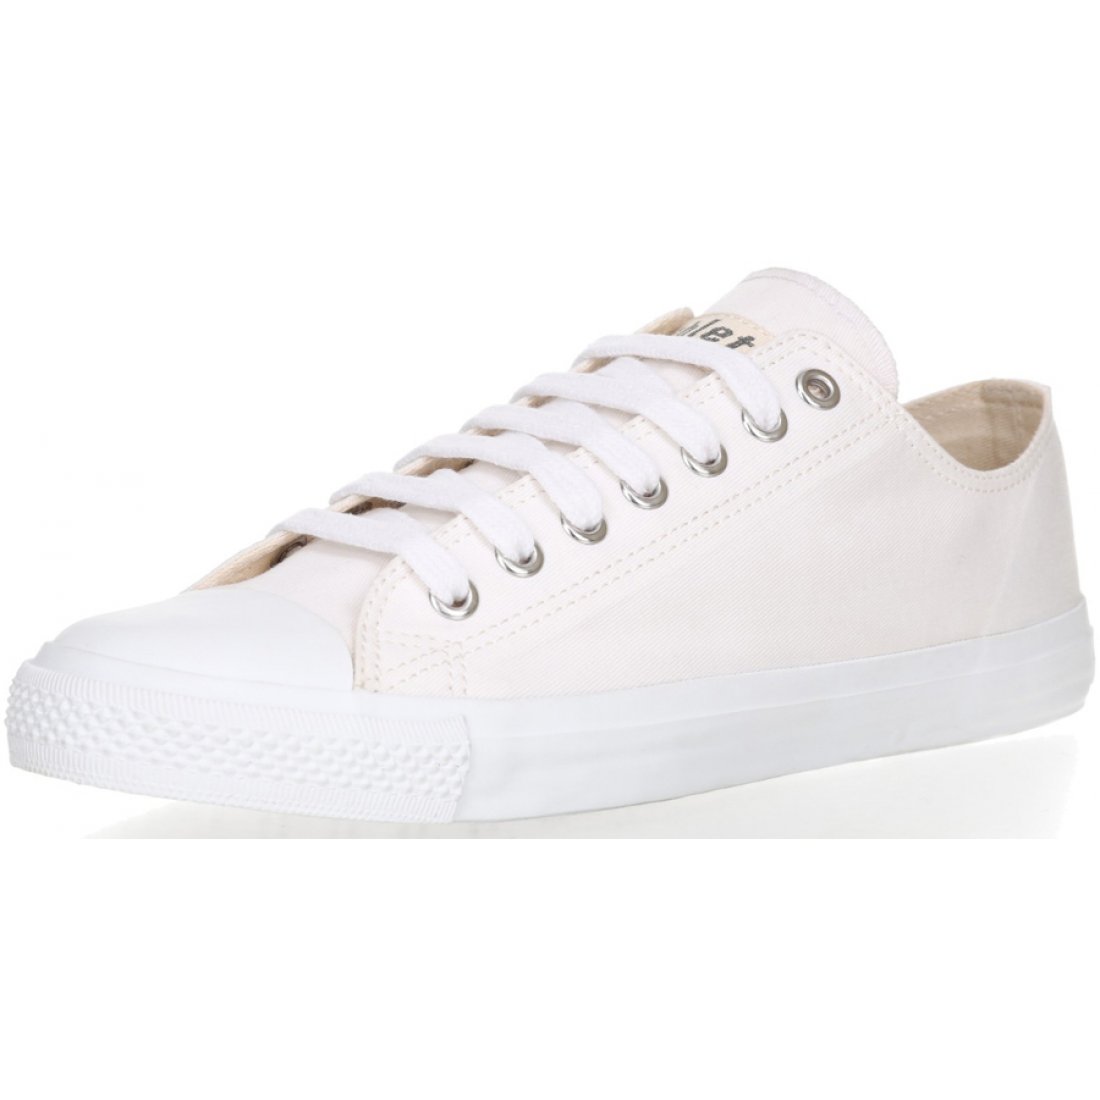 Ethletic Fairtrade Trainers - Just White - Ethletic